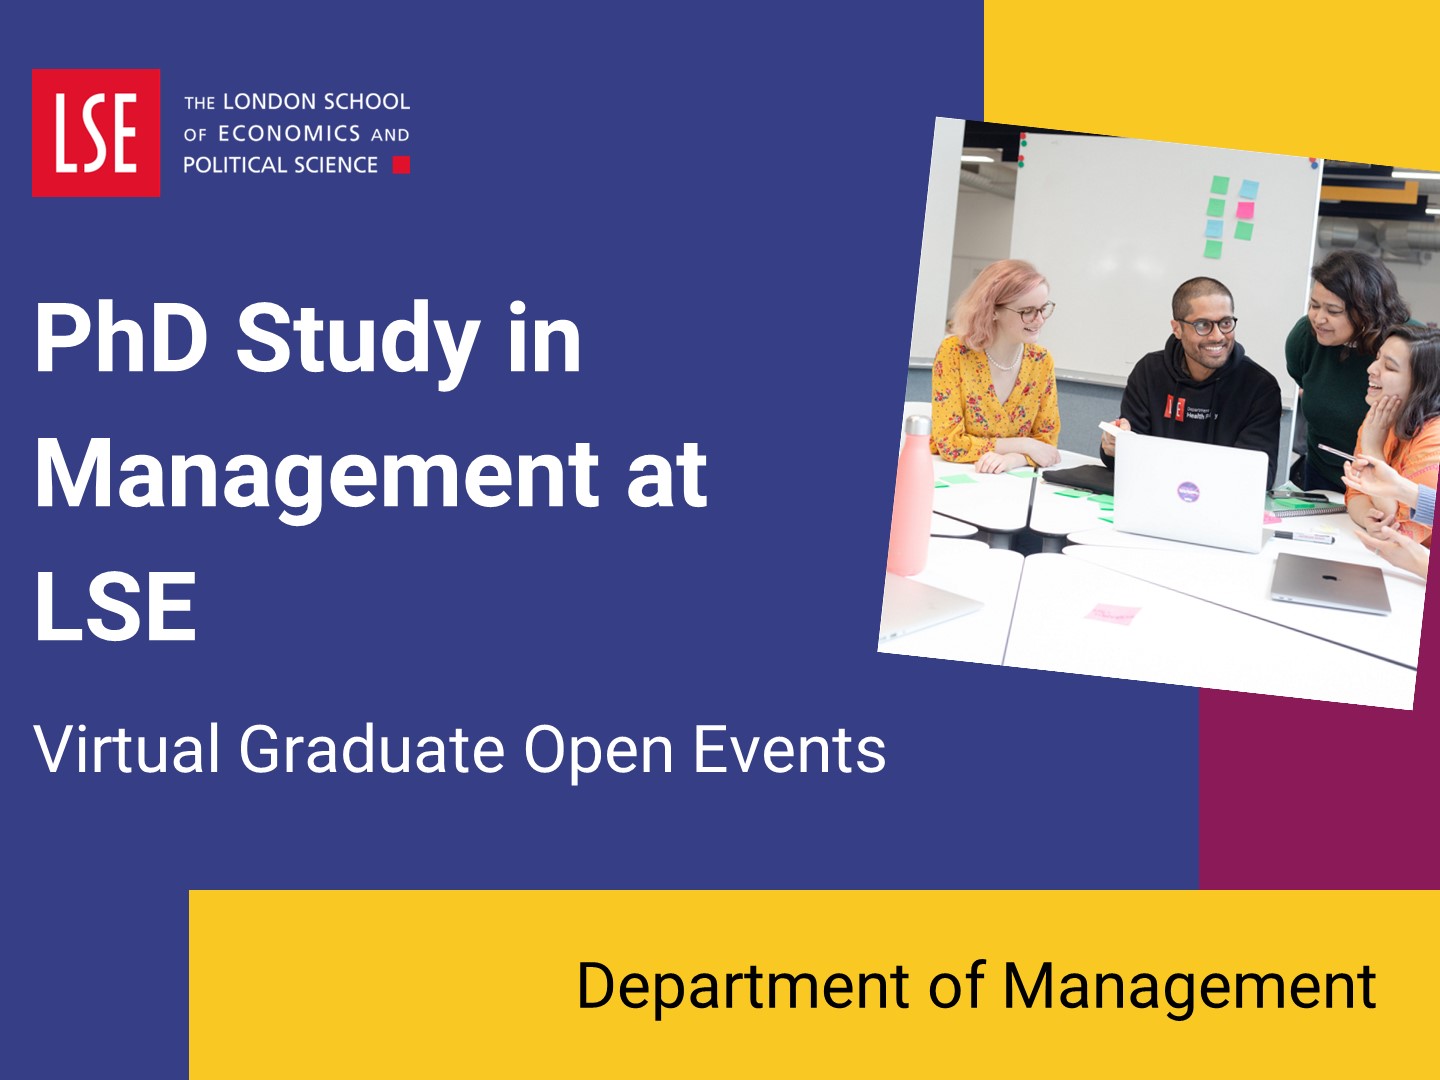 An introduction to PhD study in Management at LSE